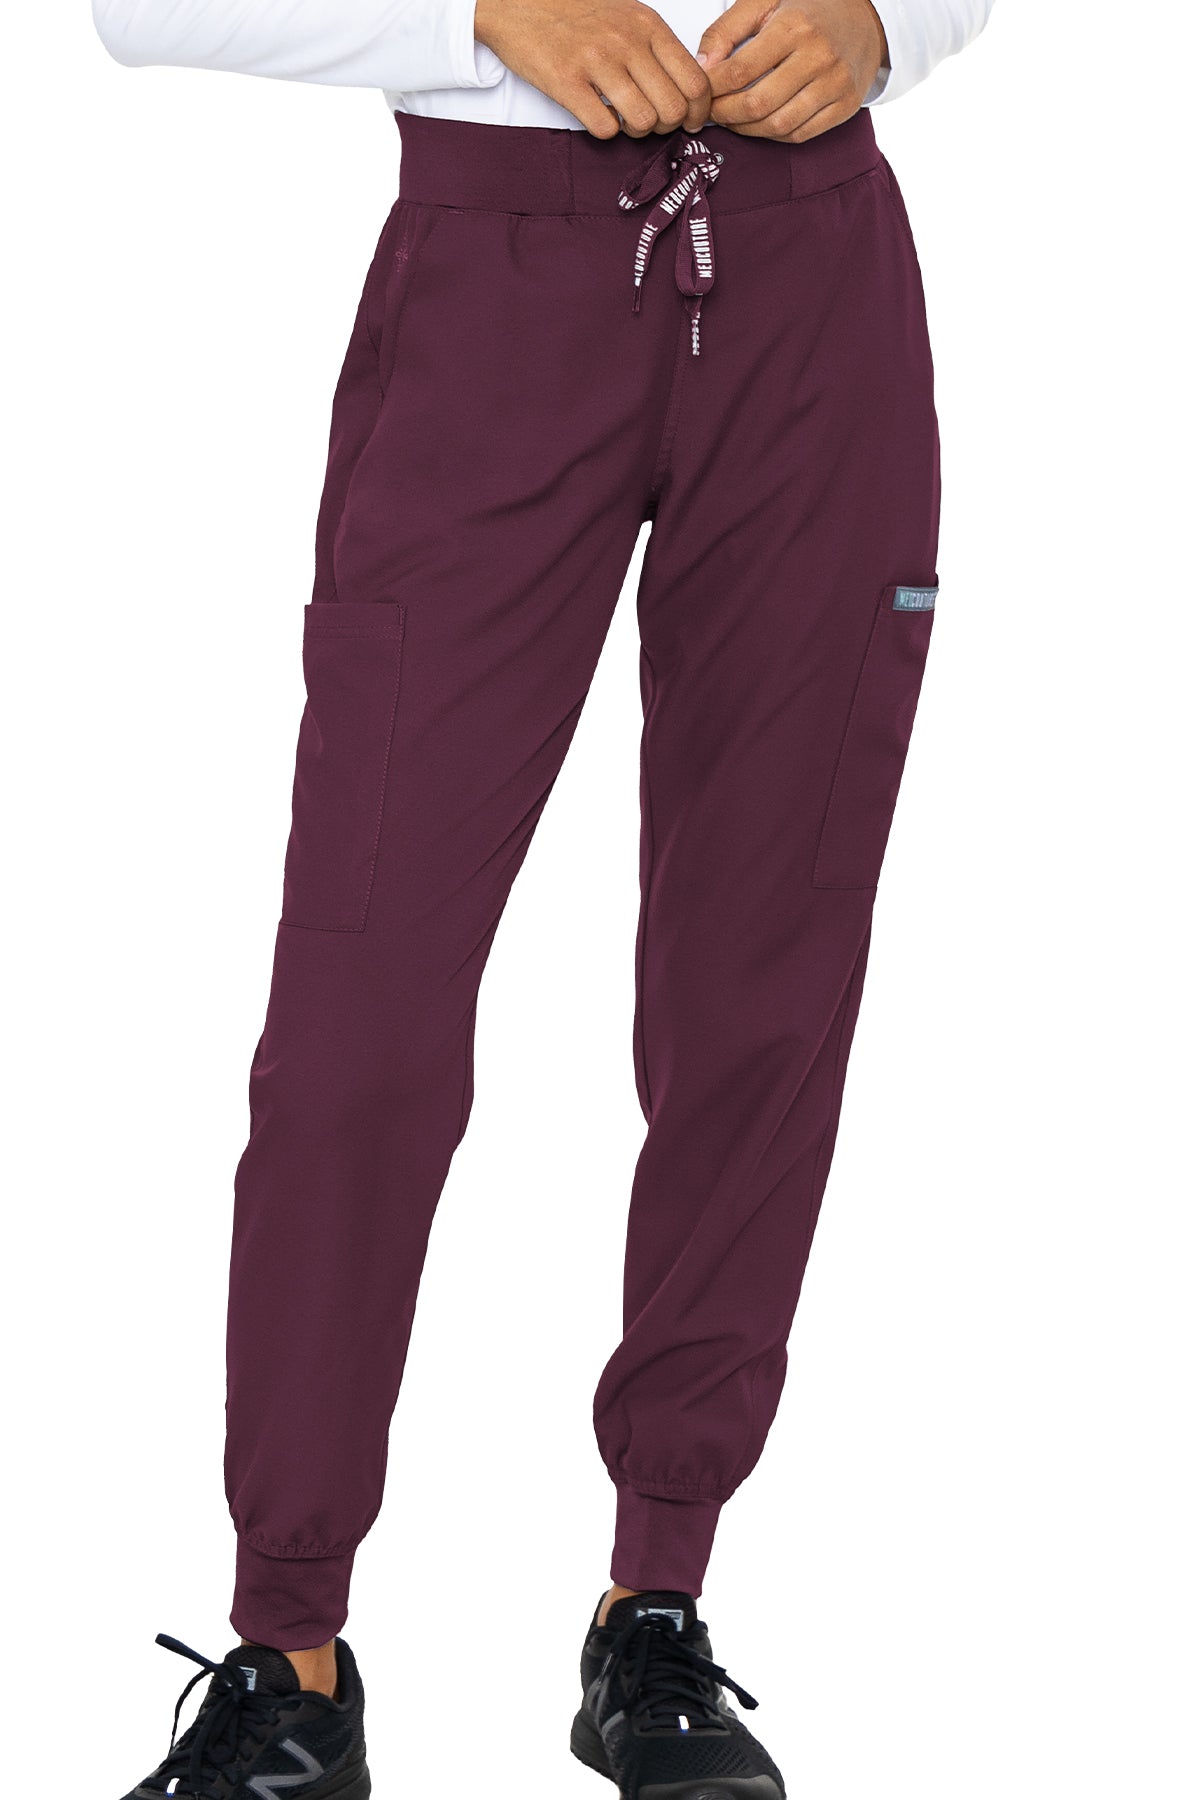 Med Couture Scrub Pants Insight Jogger Pant in Wine at Parker's Clothing and Shoes.